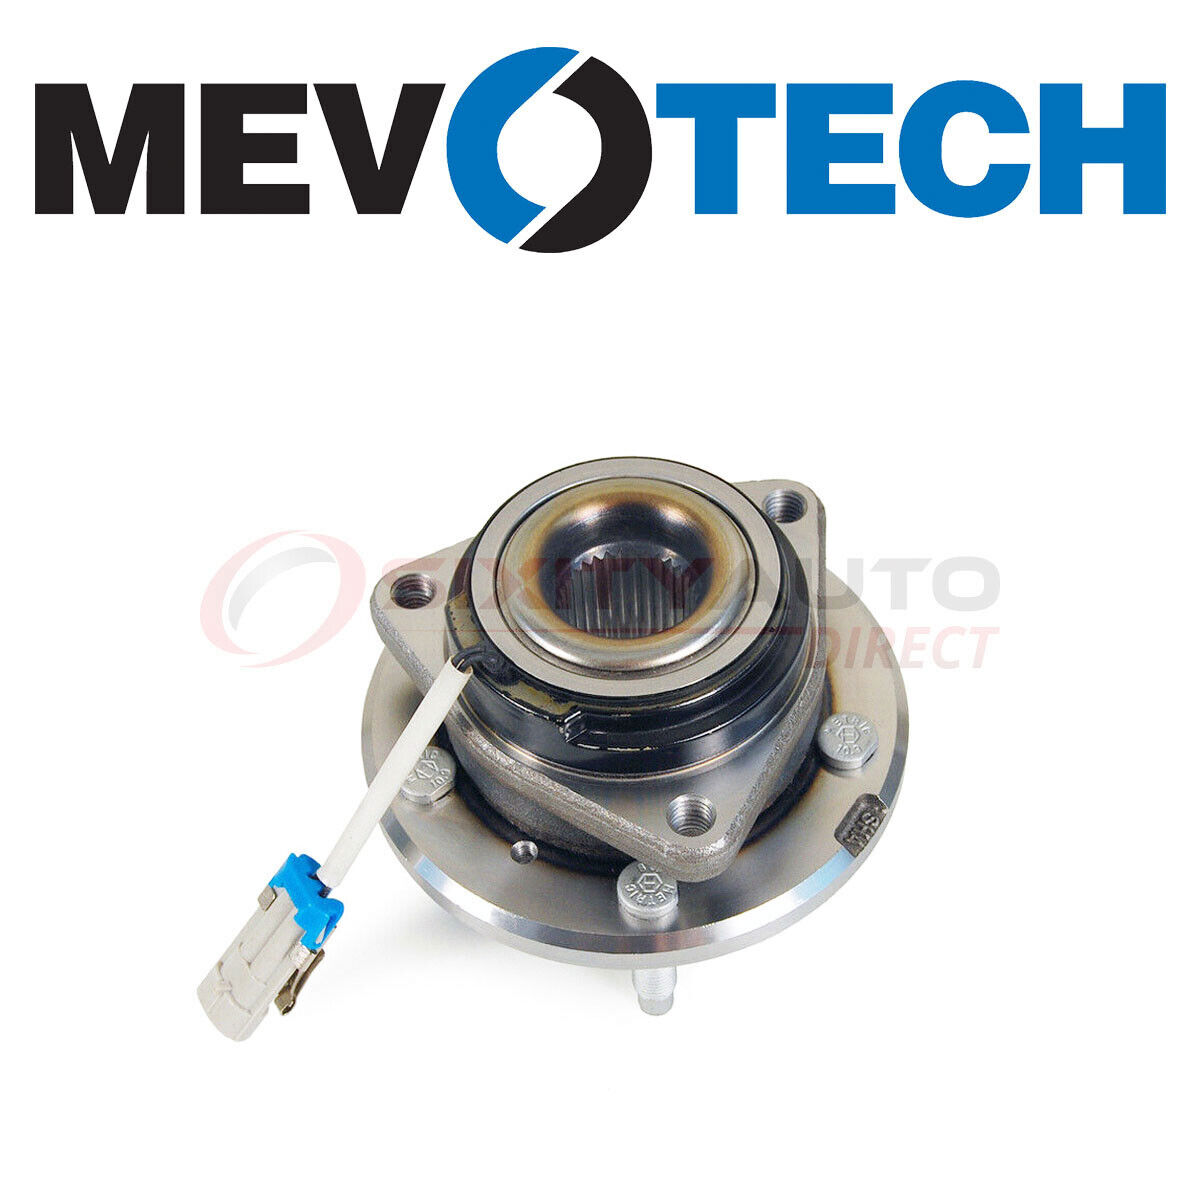 Mevotech Wheel Bearing & Hub Assembly for 1998-2001 Oldsmobile Intrigue 3.5L on